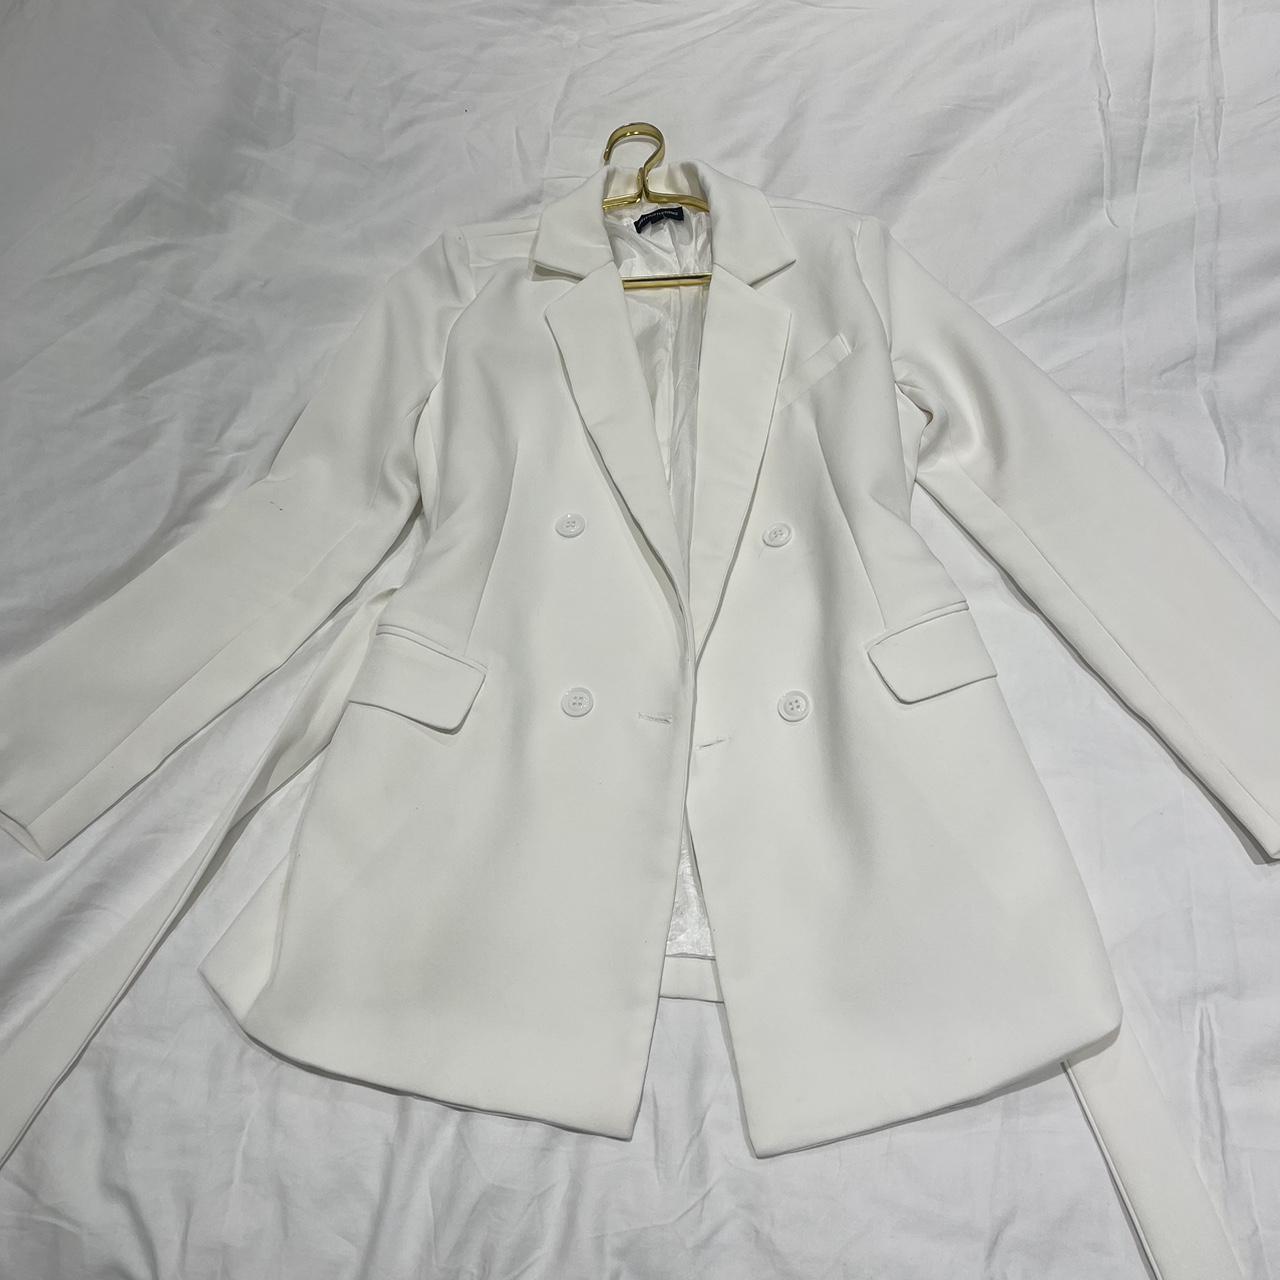 Pretty little thing white blazer - size 12 great for... - Depop